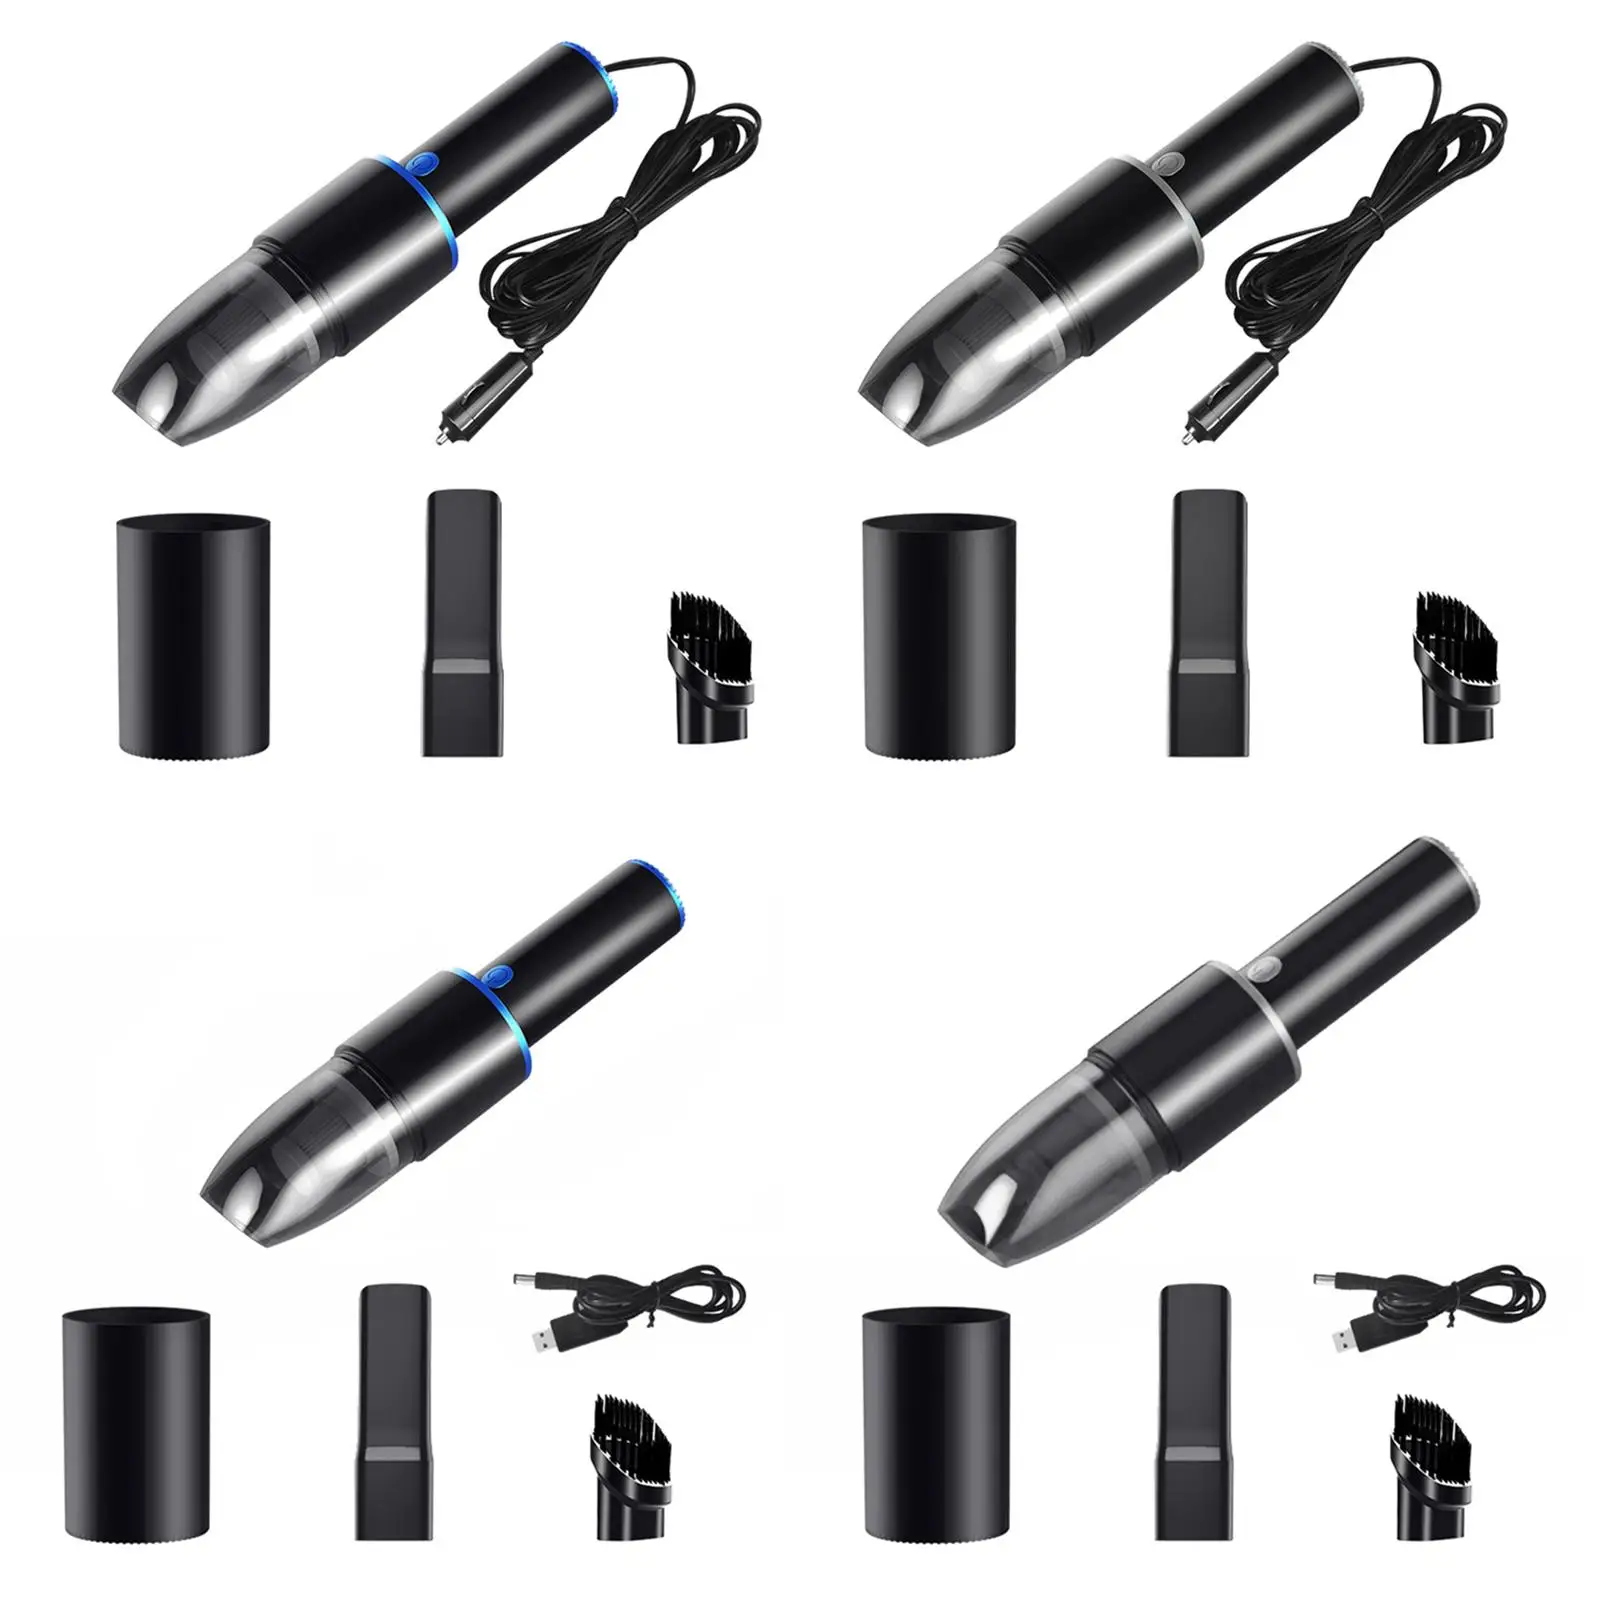 Portable Car Vacuum Cleaner Mini Washable Handheld Vacuum Fit for Pet Hair Home Car Interior Clean Fast Charge USB Rechargeable